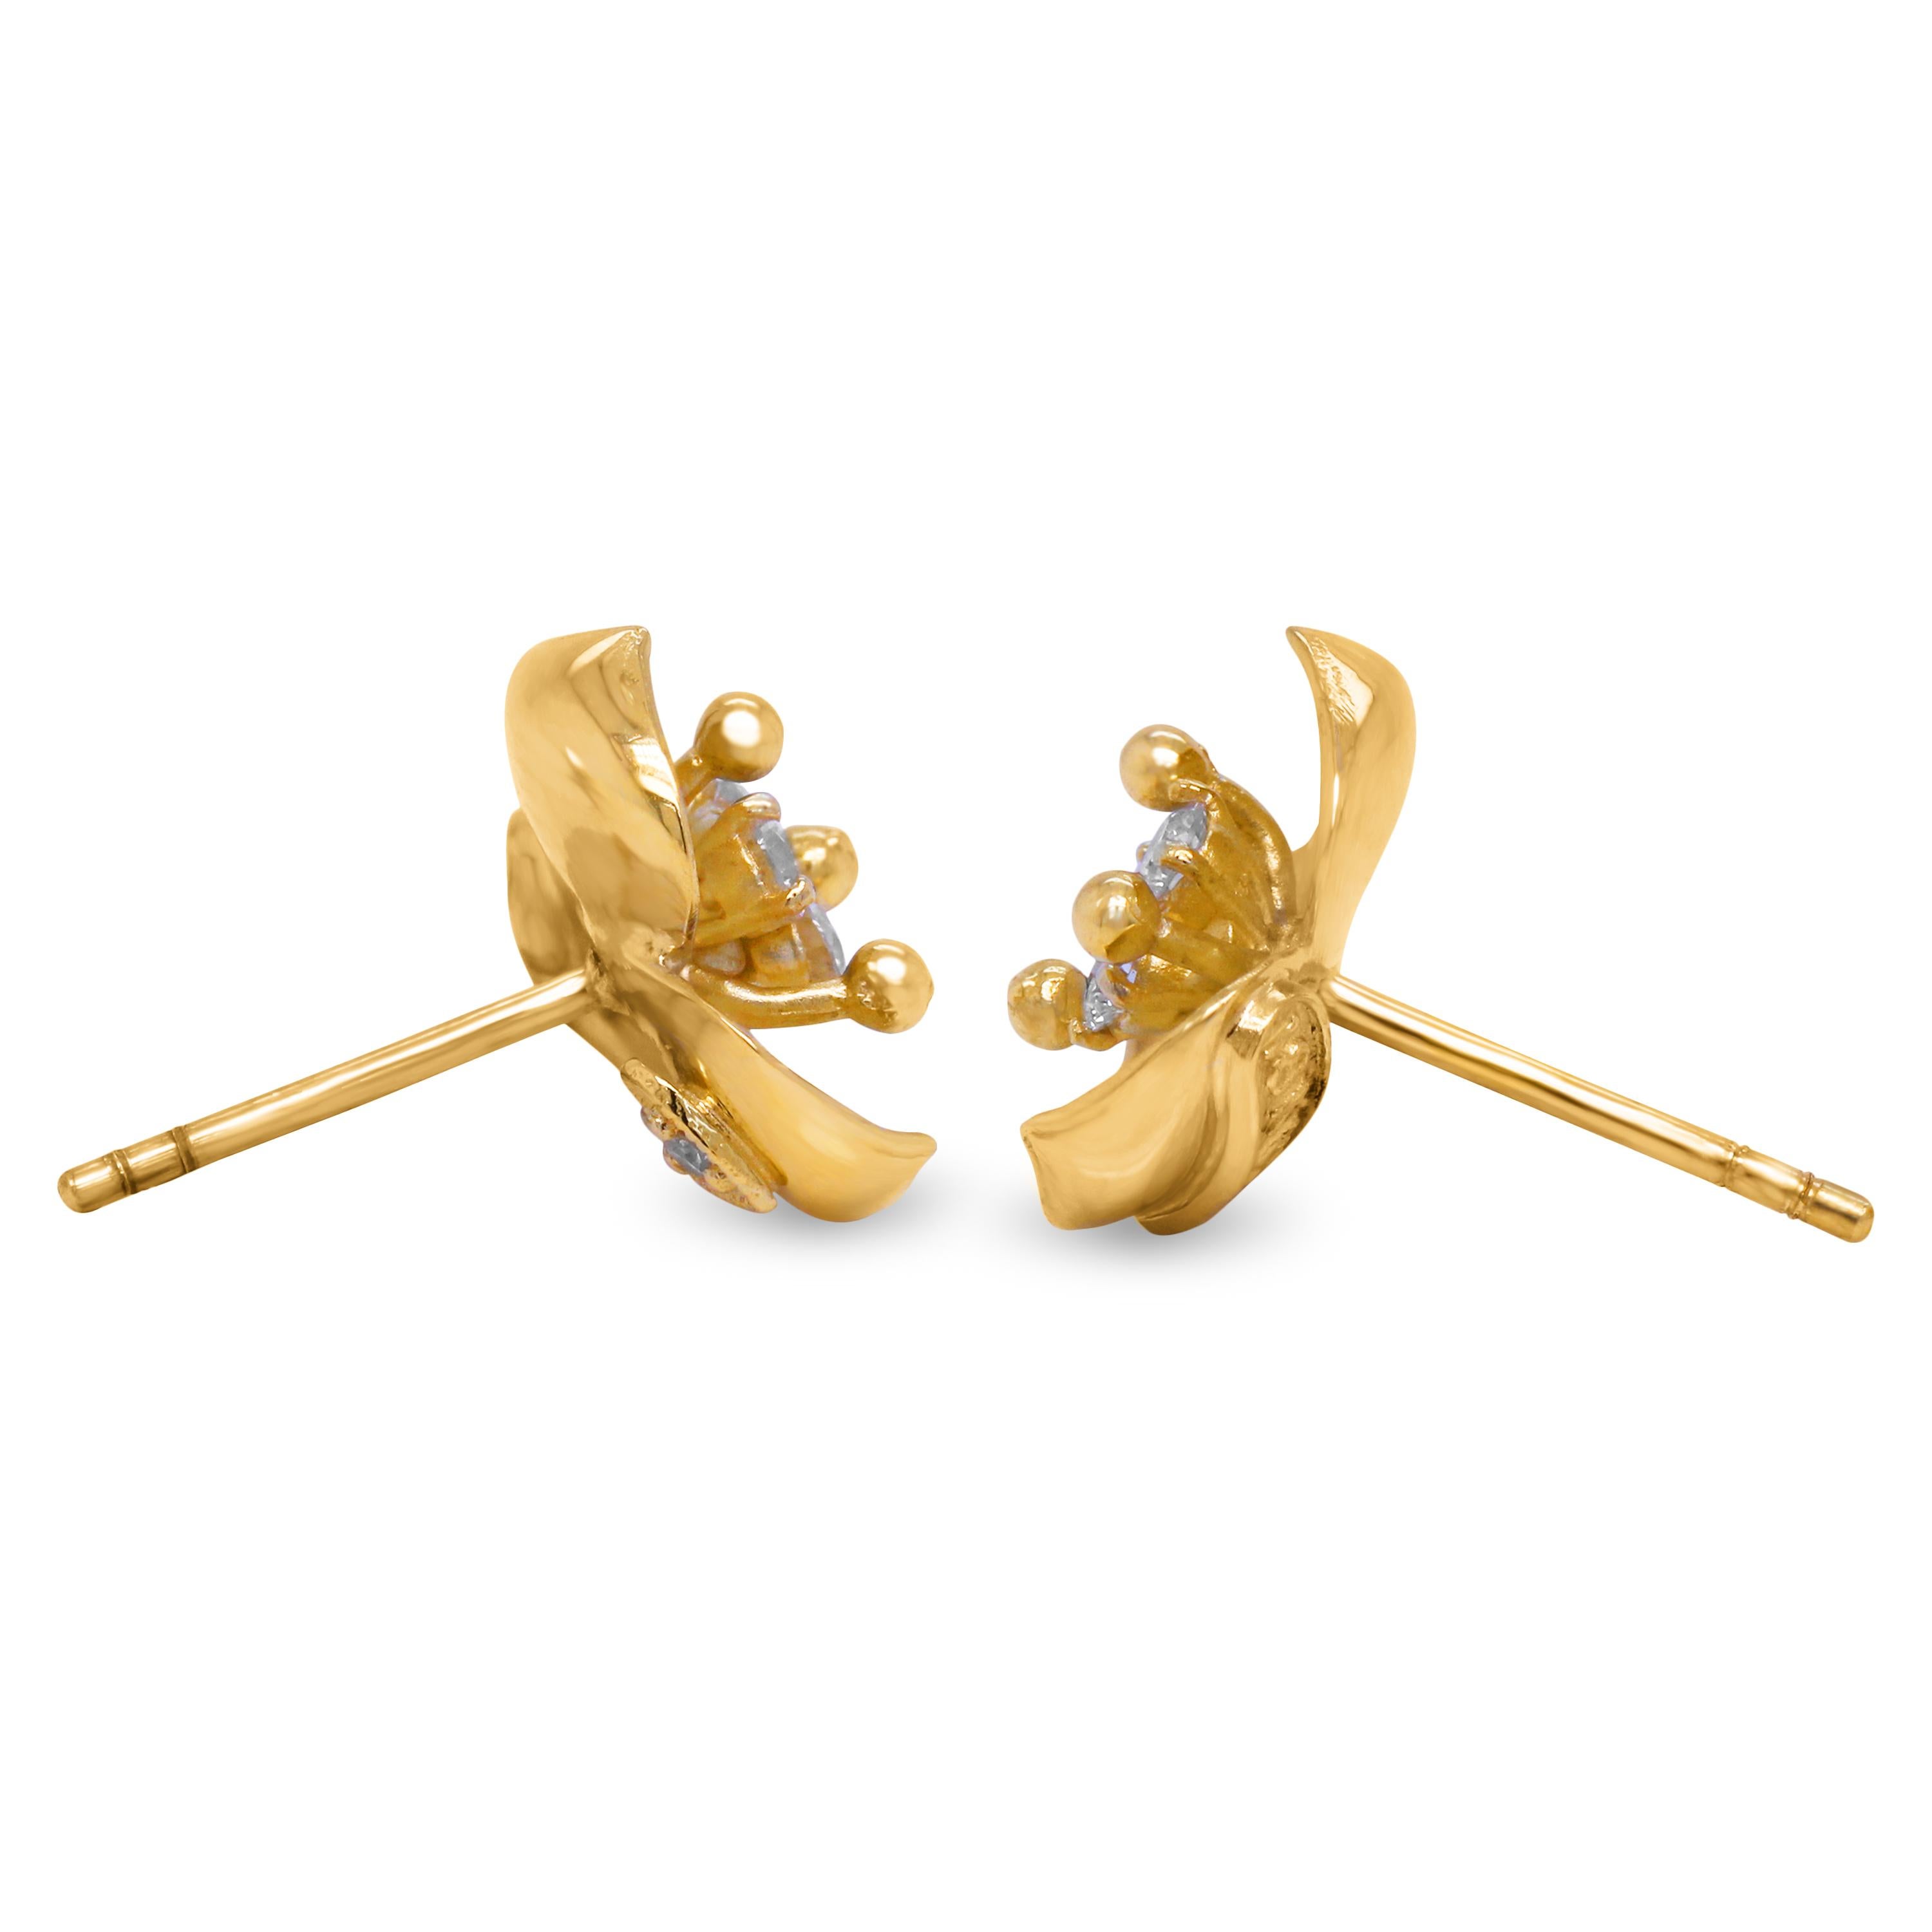 Stambolian 18 Karat Yellow Gold Diamond Floral Motif Three Leaf Stud Earrings

This tiny, cute earrings feature three diamonds set in each created in solid 18k yellow gold.

0.25 carat G color, VS clarity diamonds total weight

Earrings are 0.50